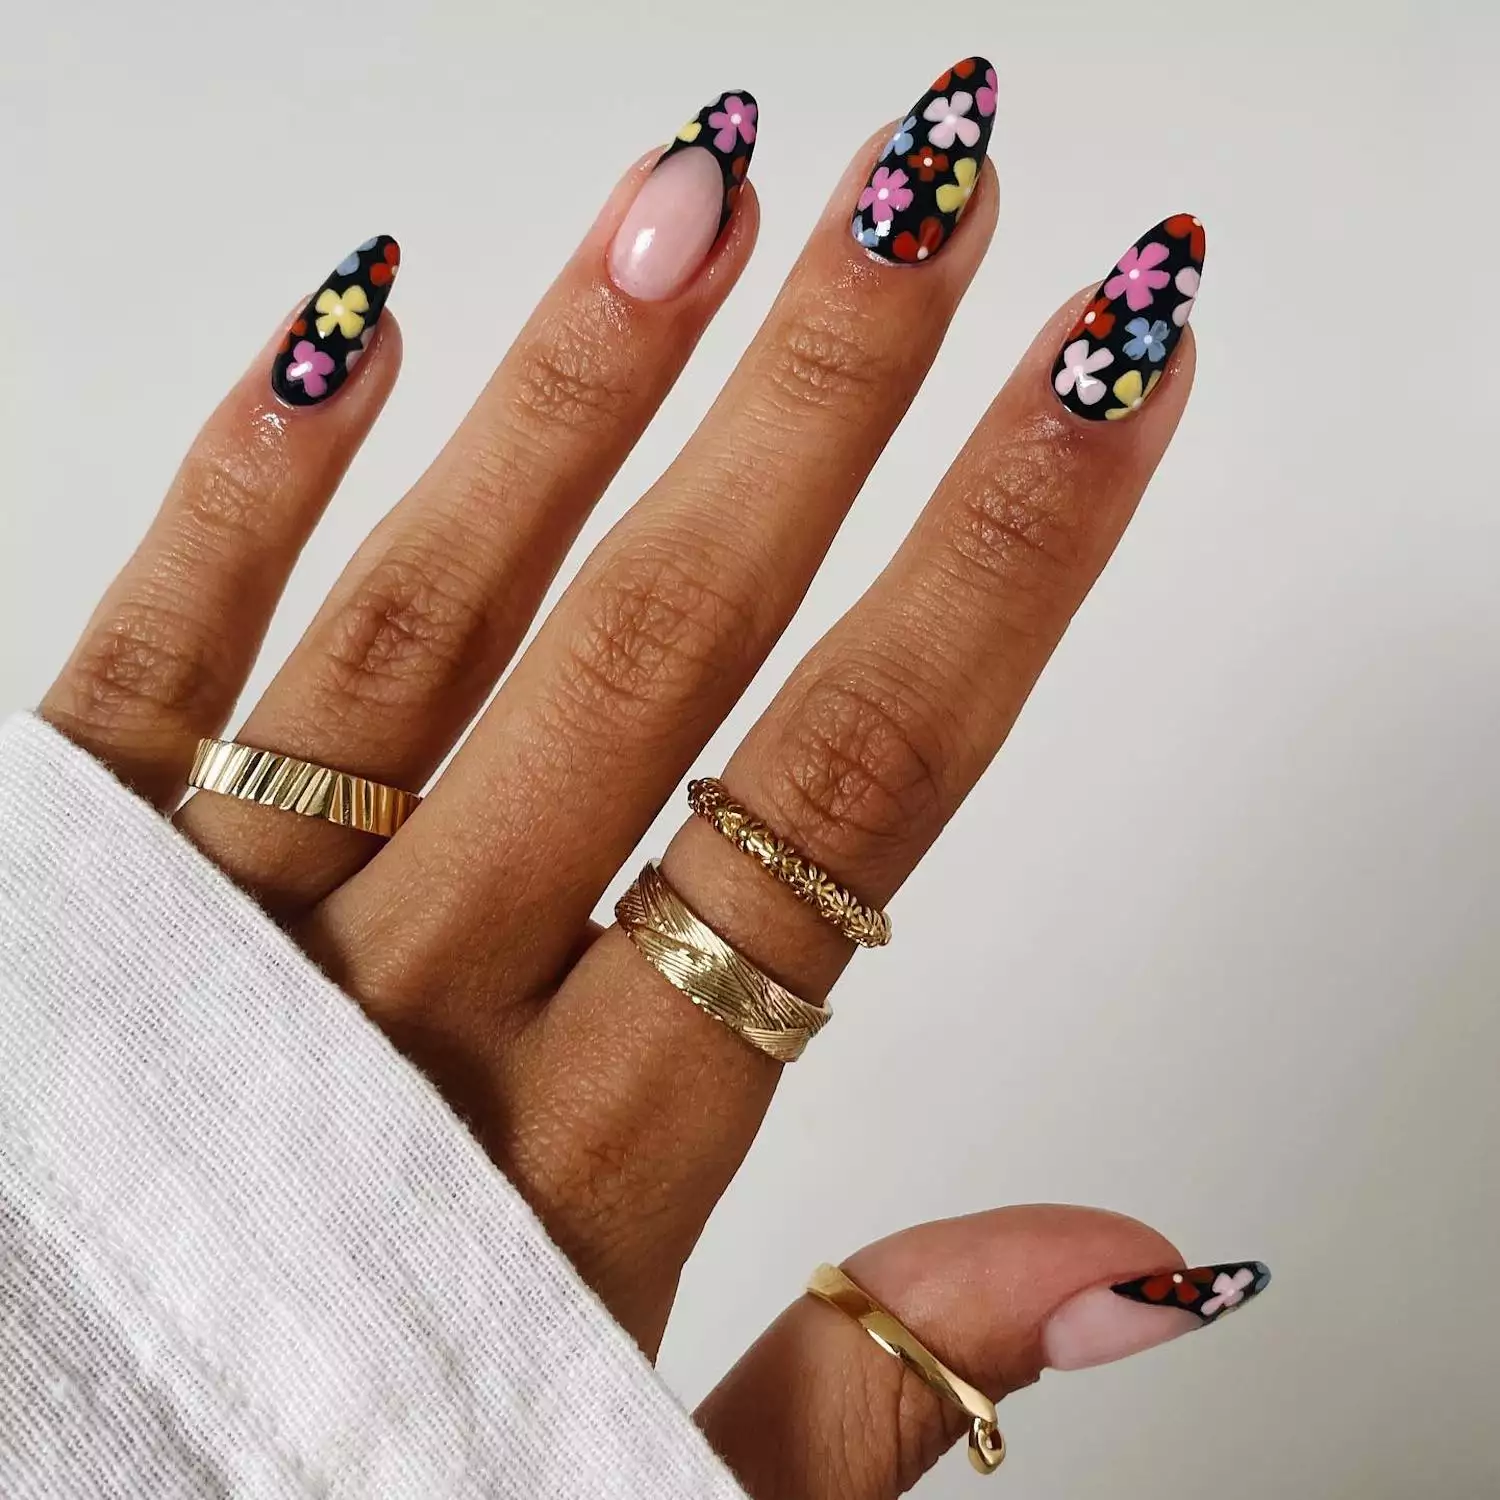 Black manicure with multicolored dark retro florals and French tip accent nails